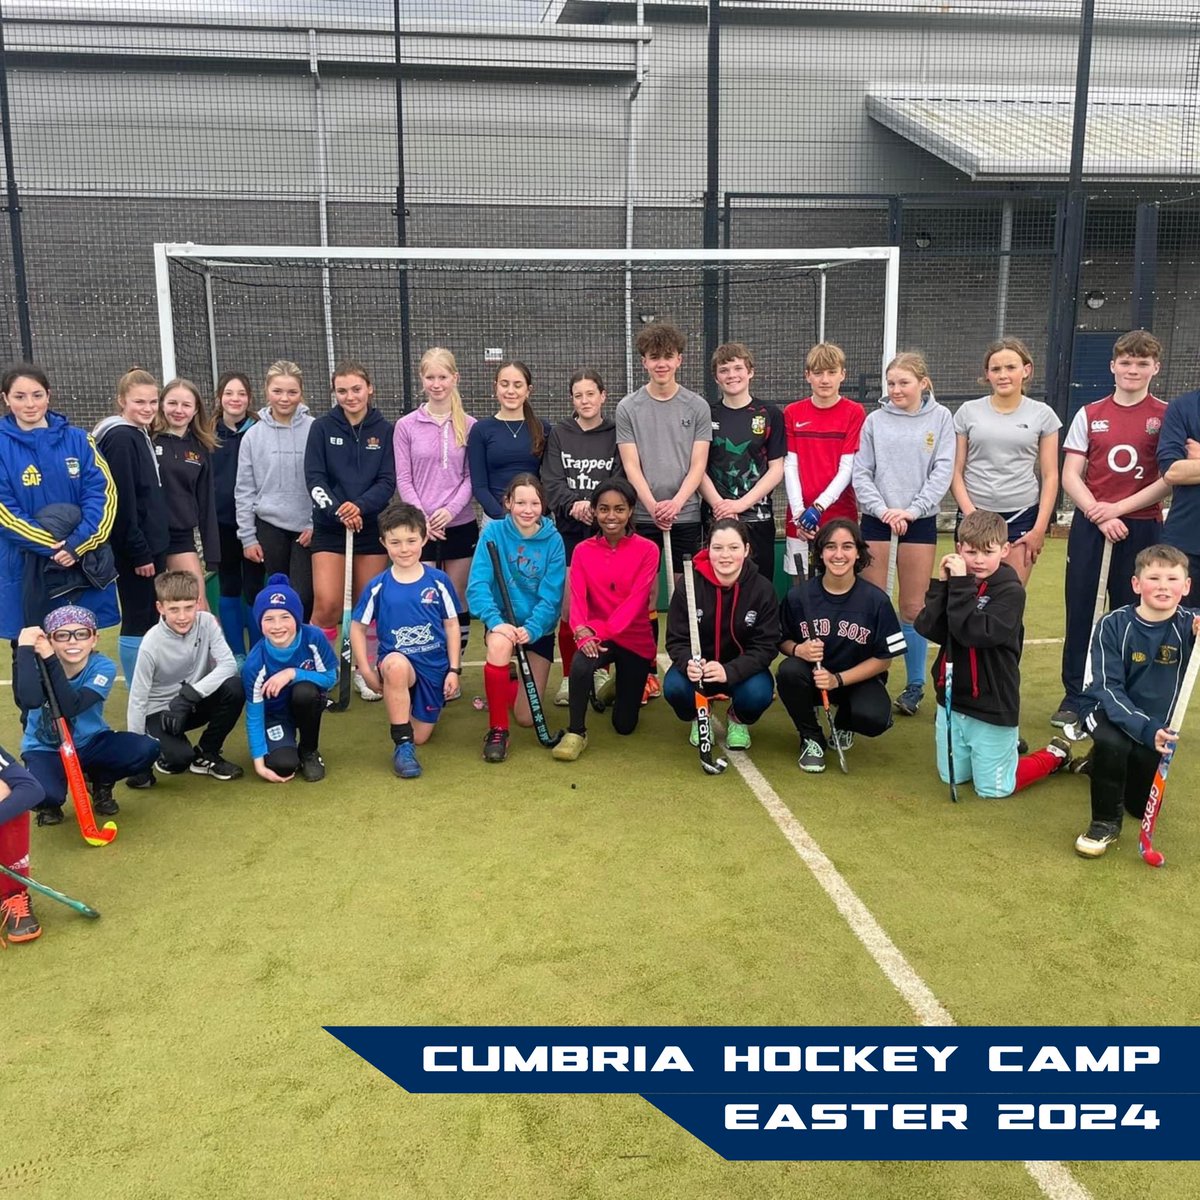 Looking back at all of the fun we had during our Easter hockey camps 🔥 We delivered 5 hockey camps including the one in these photos in Cumbria, where we absolutely love visiting 😍

We also visited Warwickshire, Shropshire, Worcestershire and Lancashire 🚙 #HockeyCamps